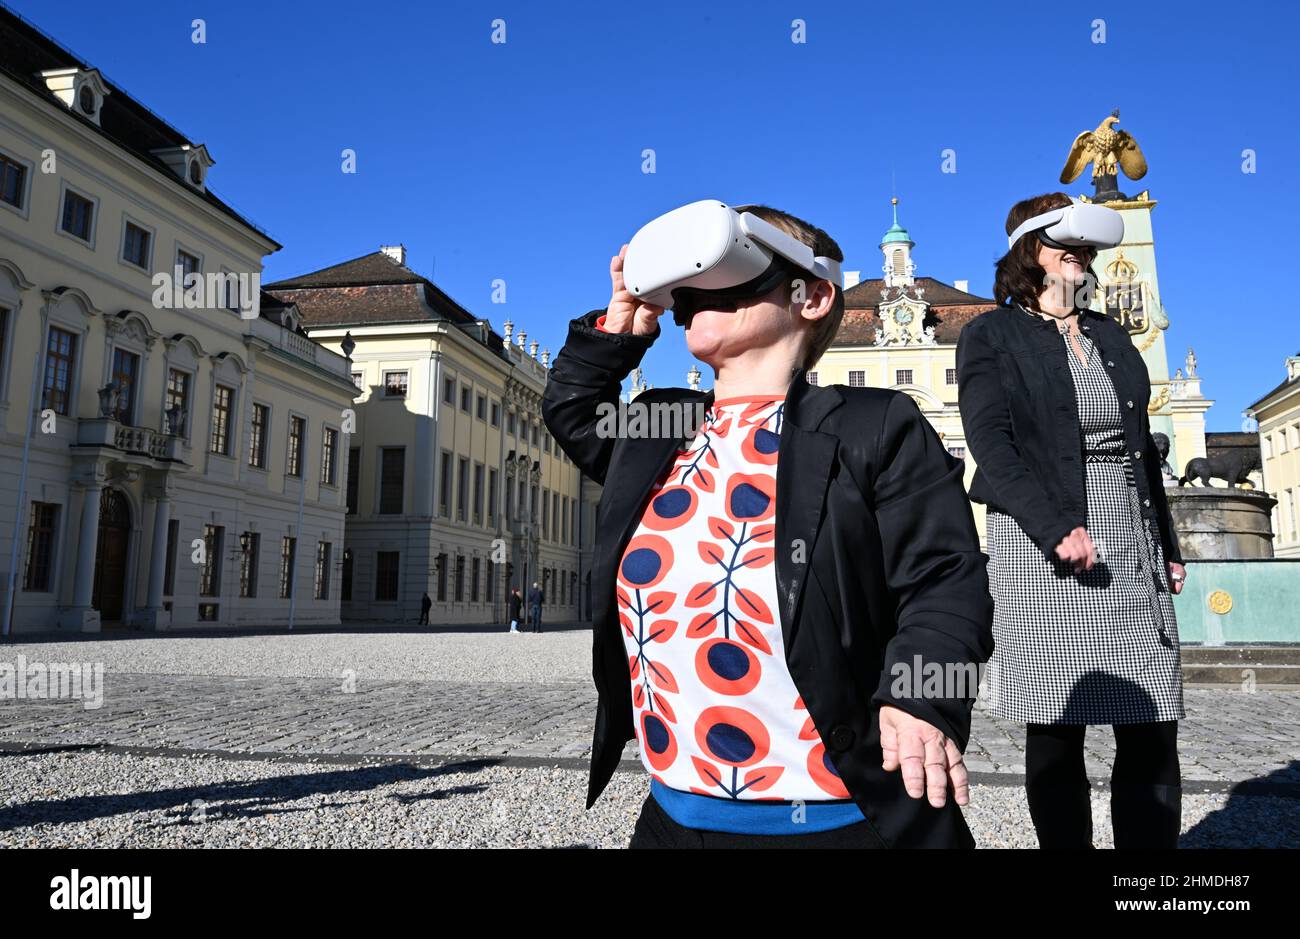 09 February 2022, Baden-Wuerttemberg, Ludwigsburg: Simone Fischer (l), the Representative for the Disabled of the State of Baden-Württemberg, and State Secretary Gisela Splett (r) stand in the courtyard of the palace complex during the presentation of a pilot project for virtual tours of three areas of the Ludwigsburg Residence Palace using data glasses. Thanks to virtual reality, rooms can be visited that are otherwise inaccessible. Photo: Bernd Weißbrod/dpa Stock Photo